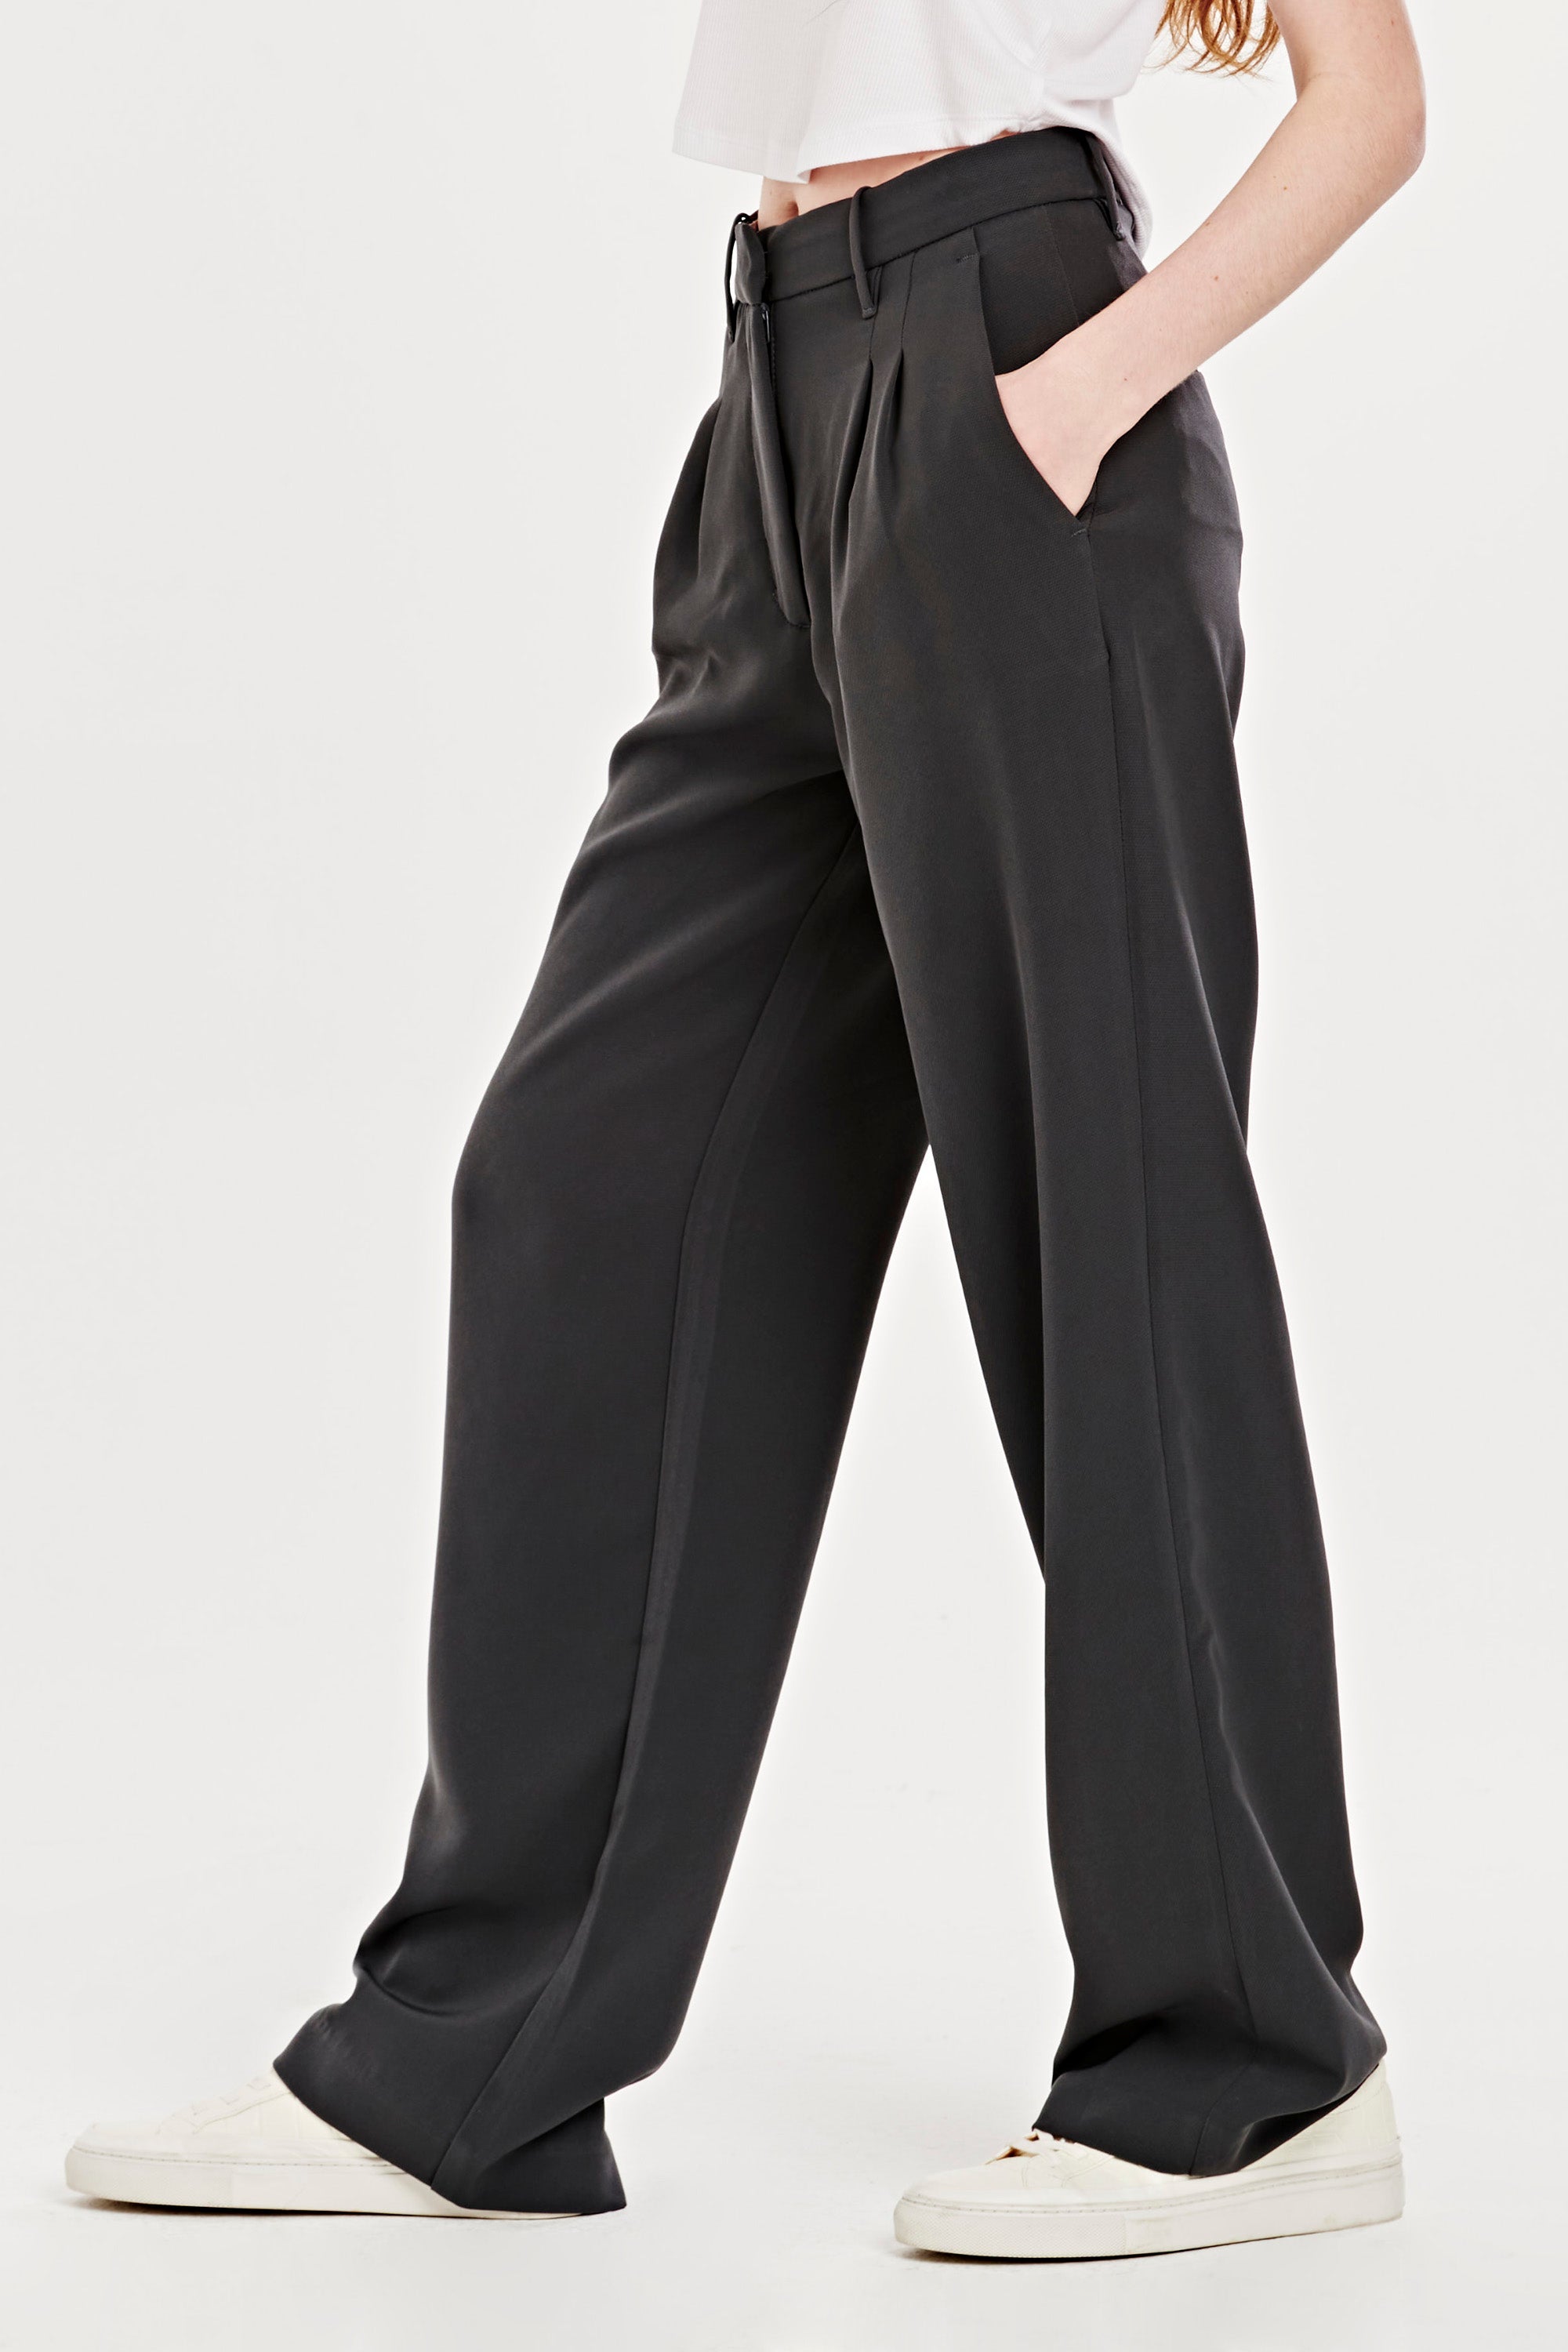 adelaide-high-rise-wide-leg-pant-charcoal